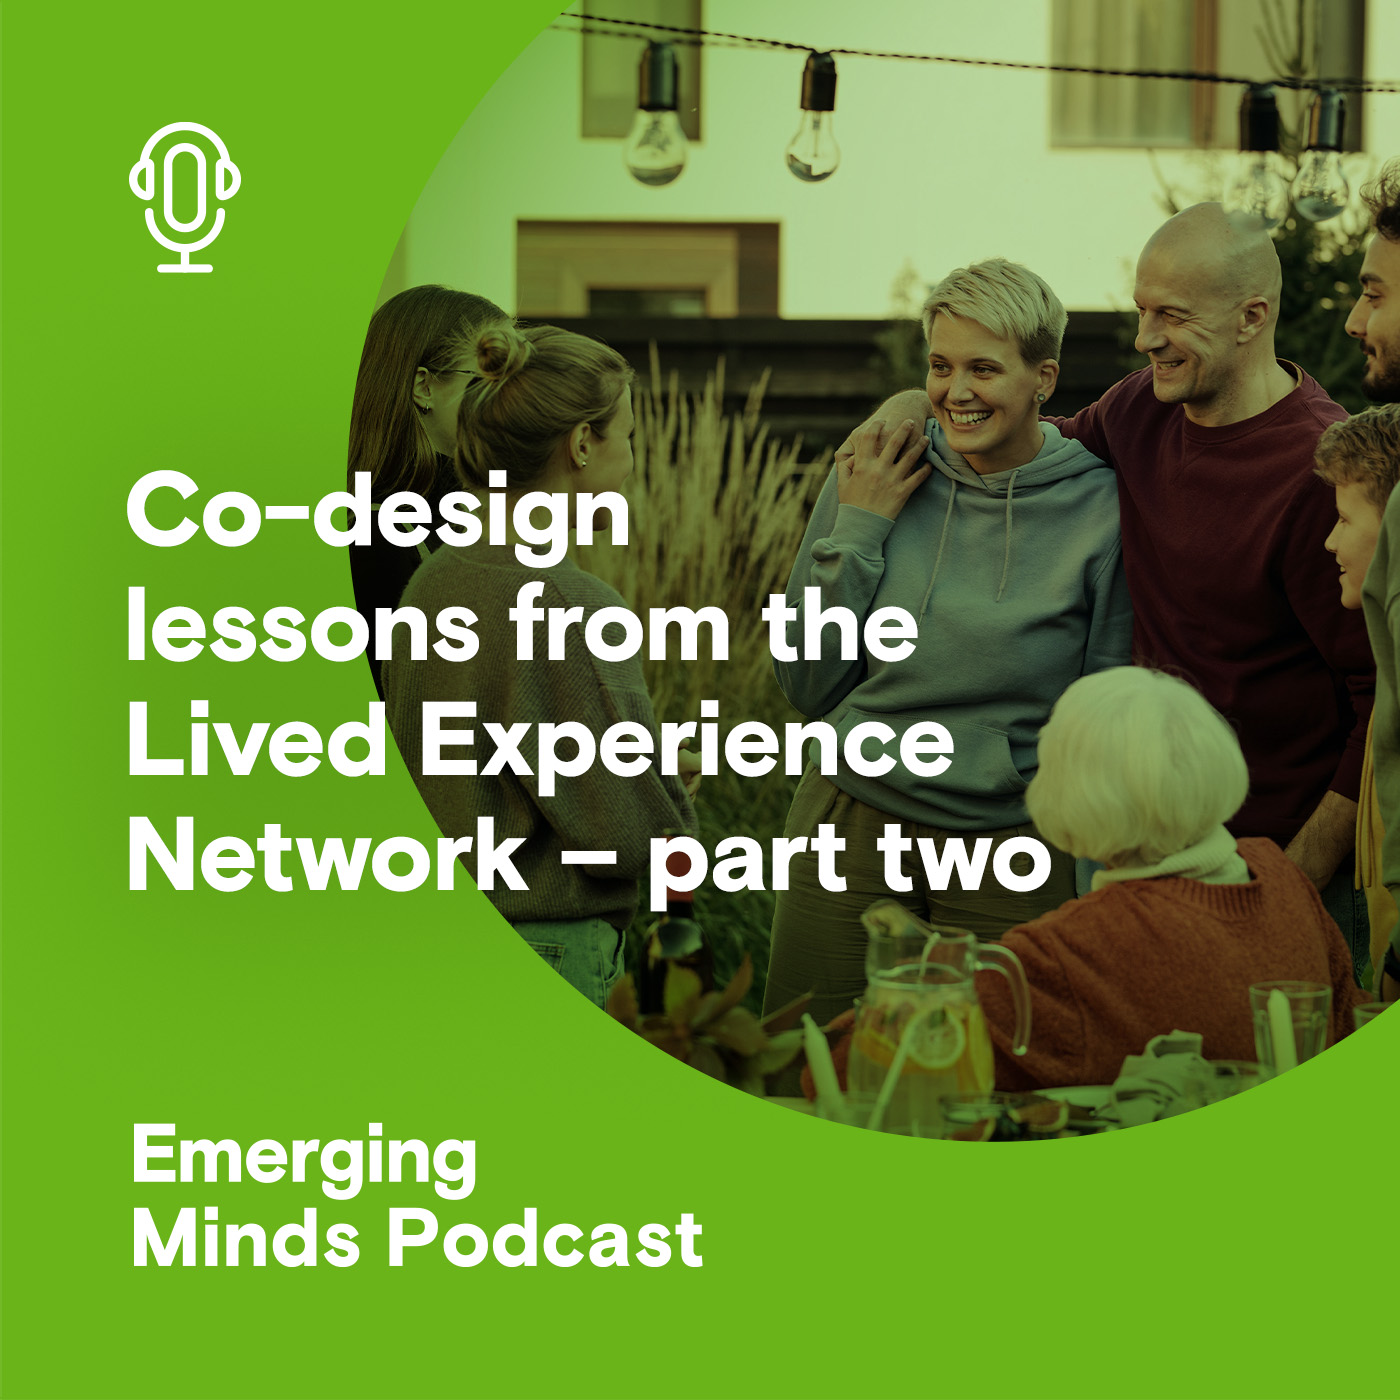 Co-design lessons from the Lived Experience Network - part two